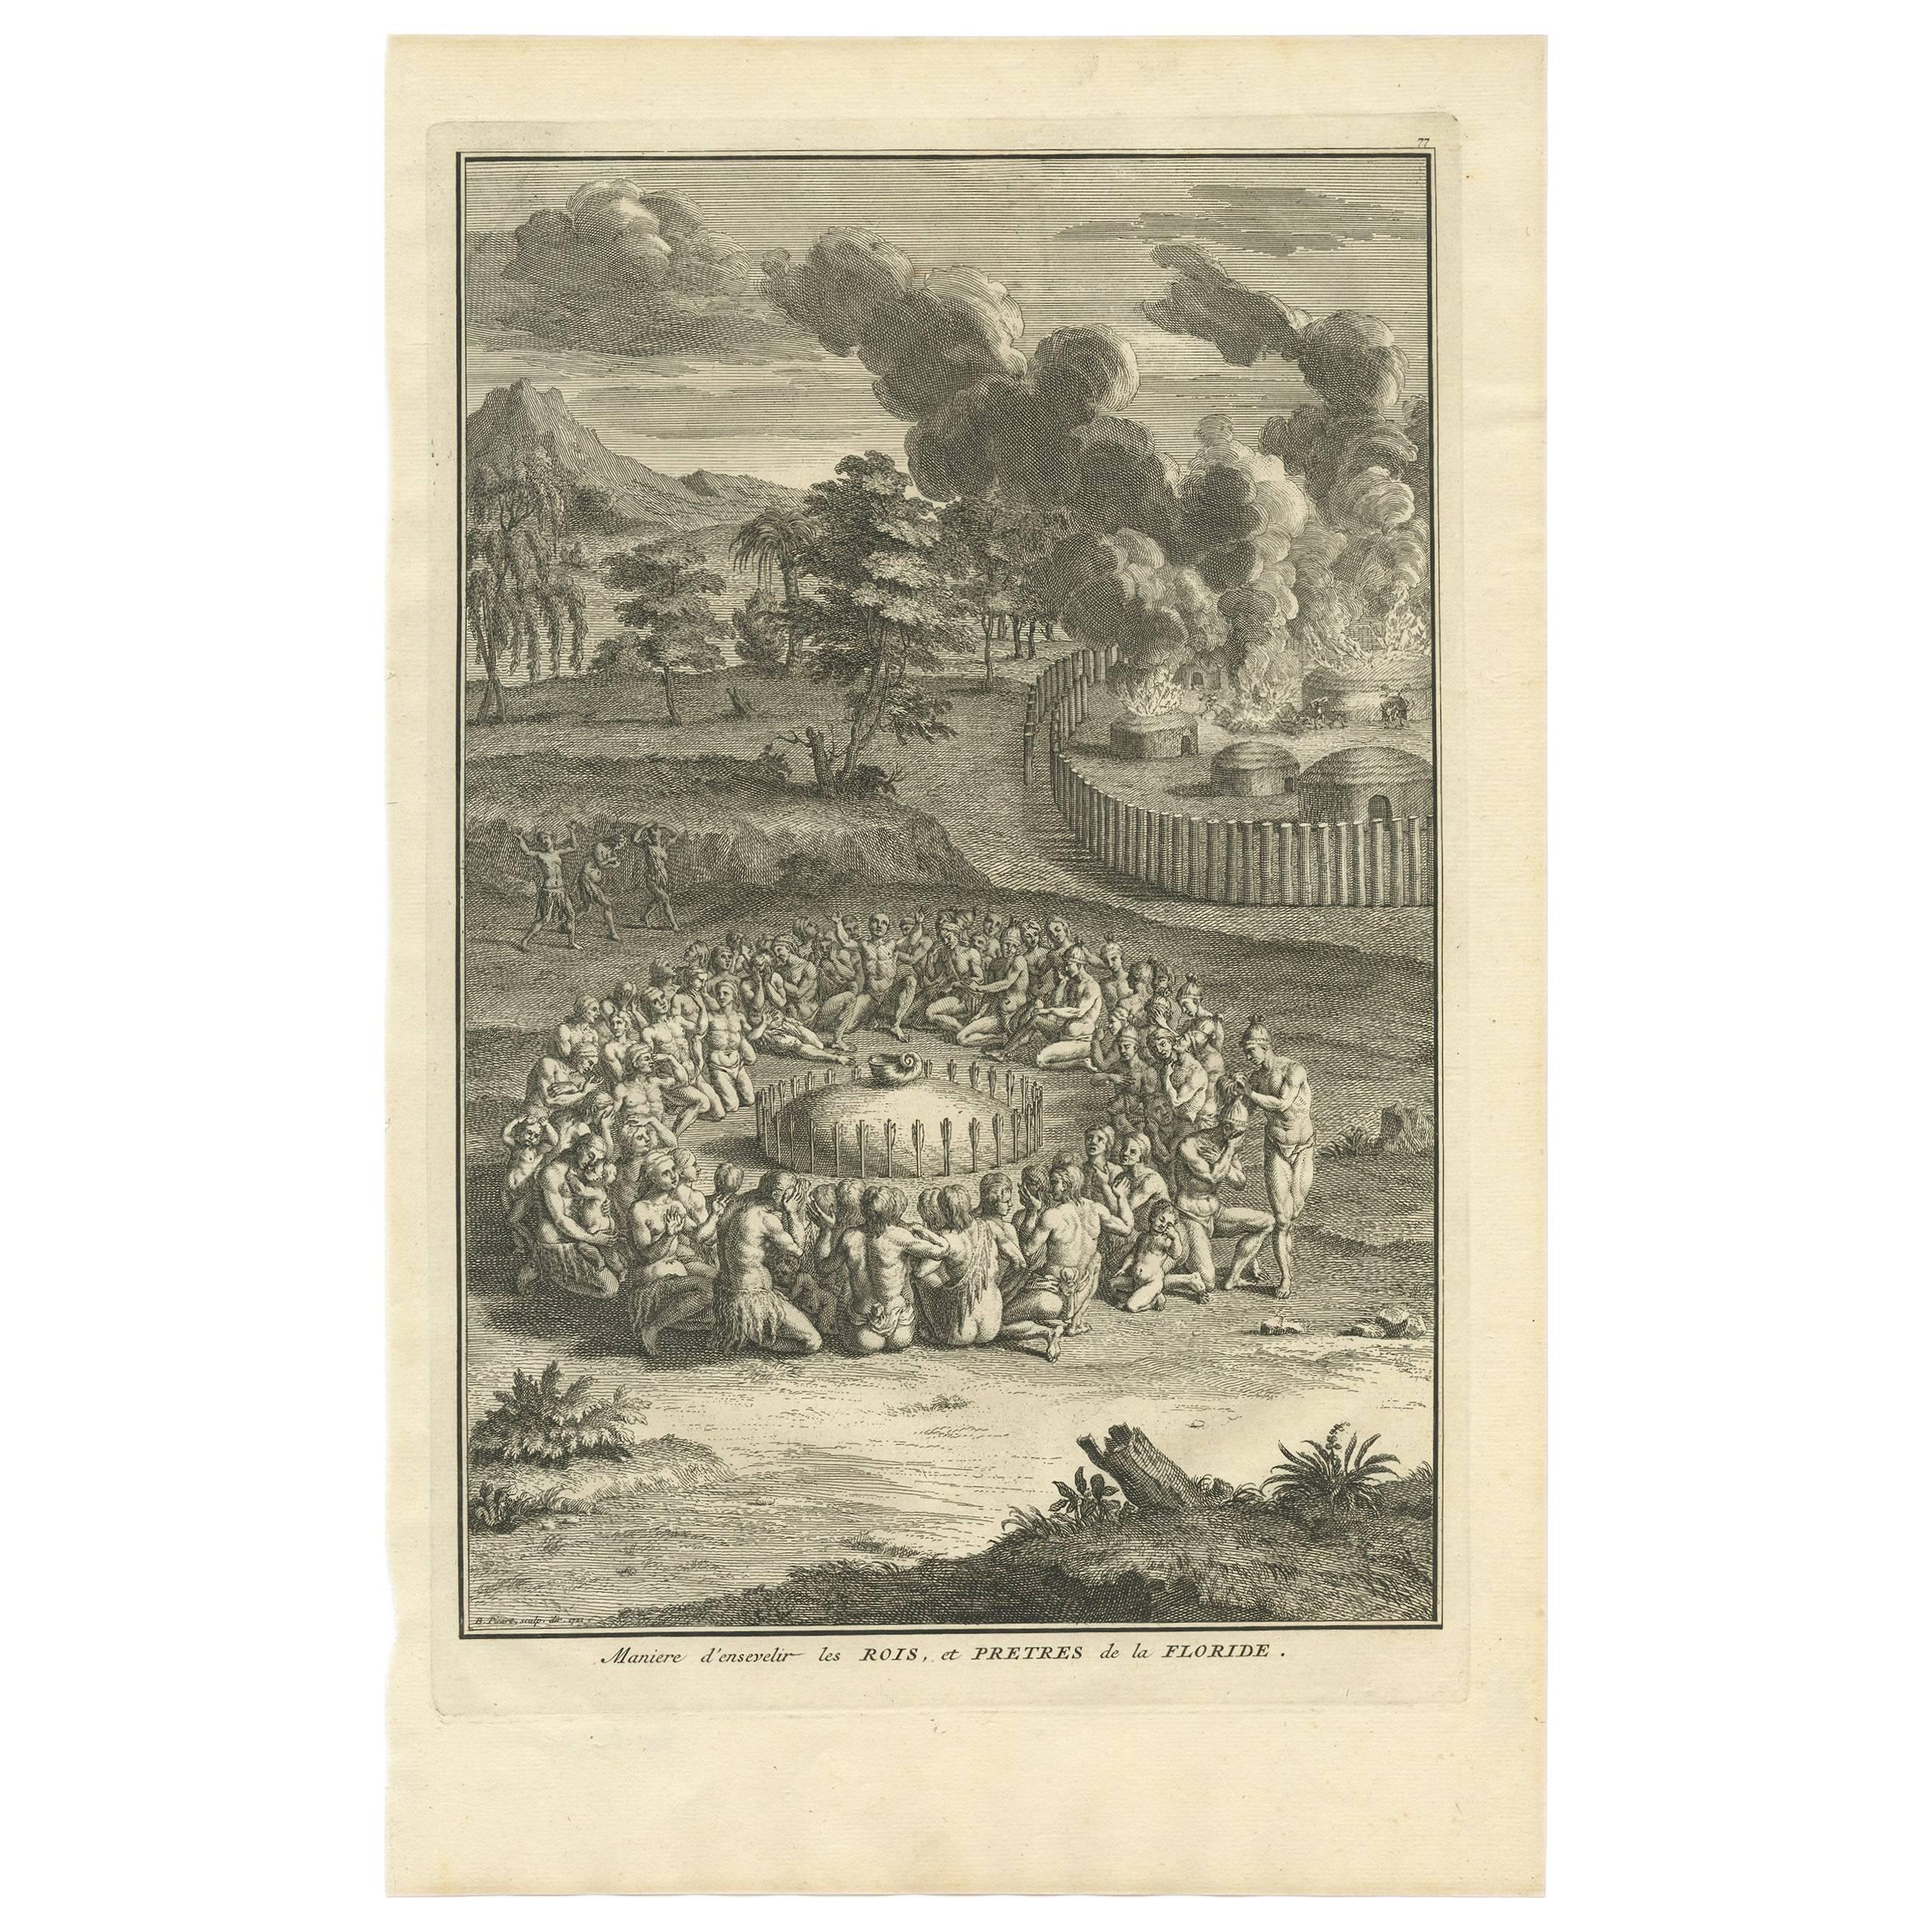 Antique Print of the Burying Ceremony of Kings and Priests of Florida For Sale